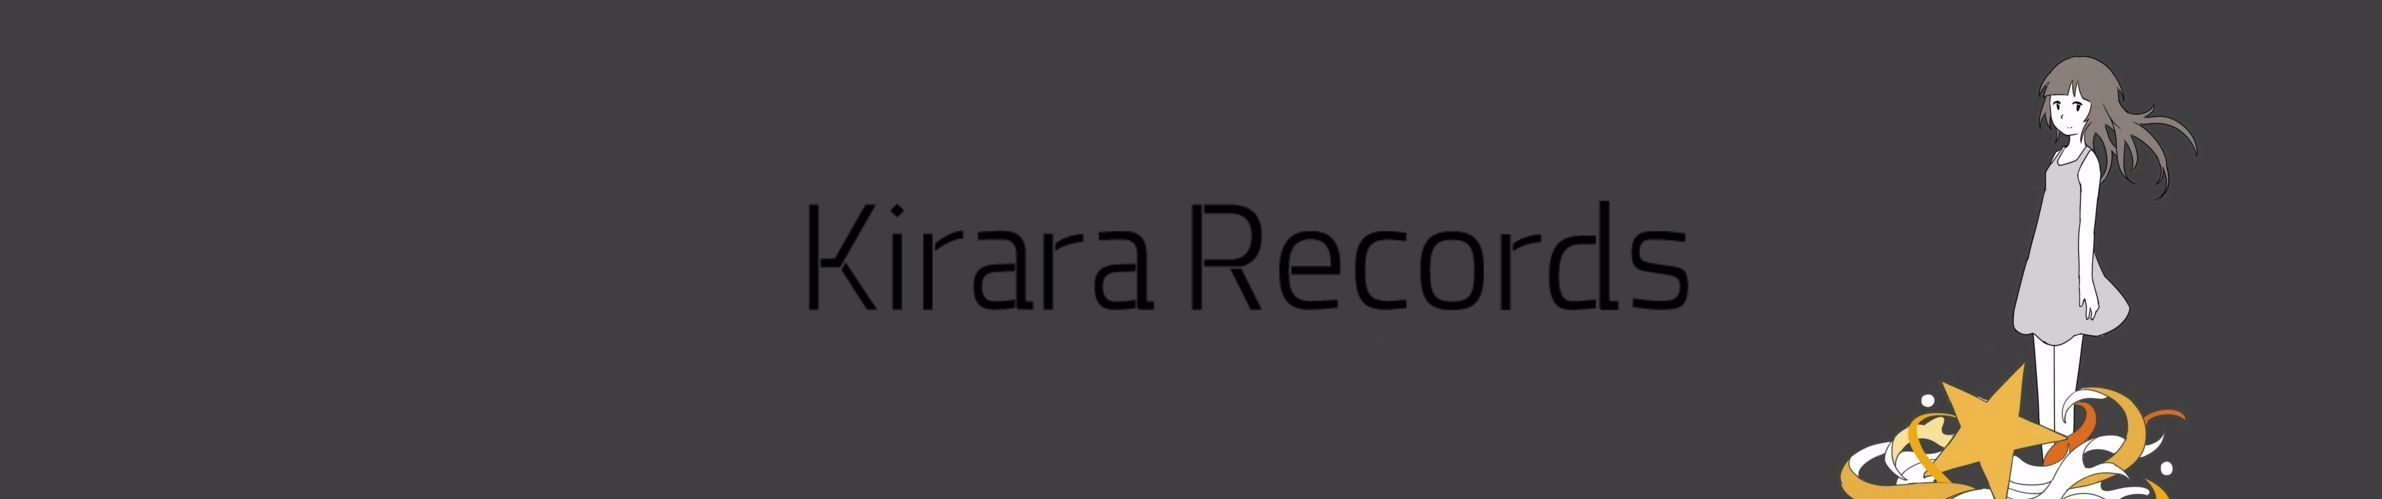 Stream Kirara Records music | Listen to songs, albums, playlists for free  on SoundCloud